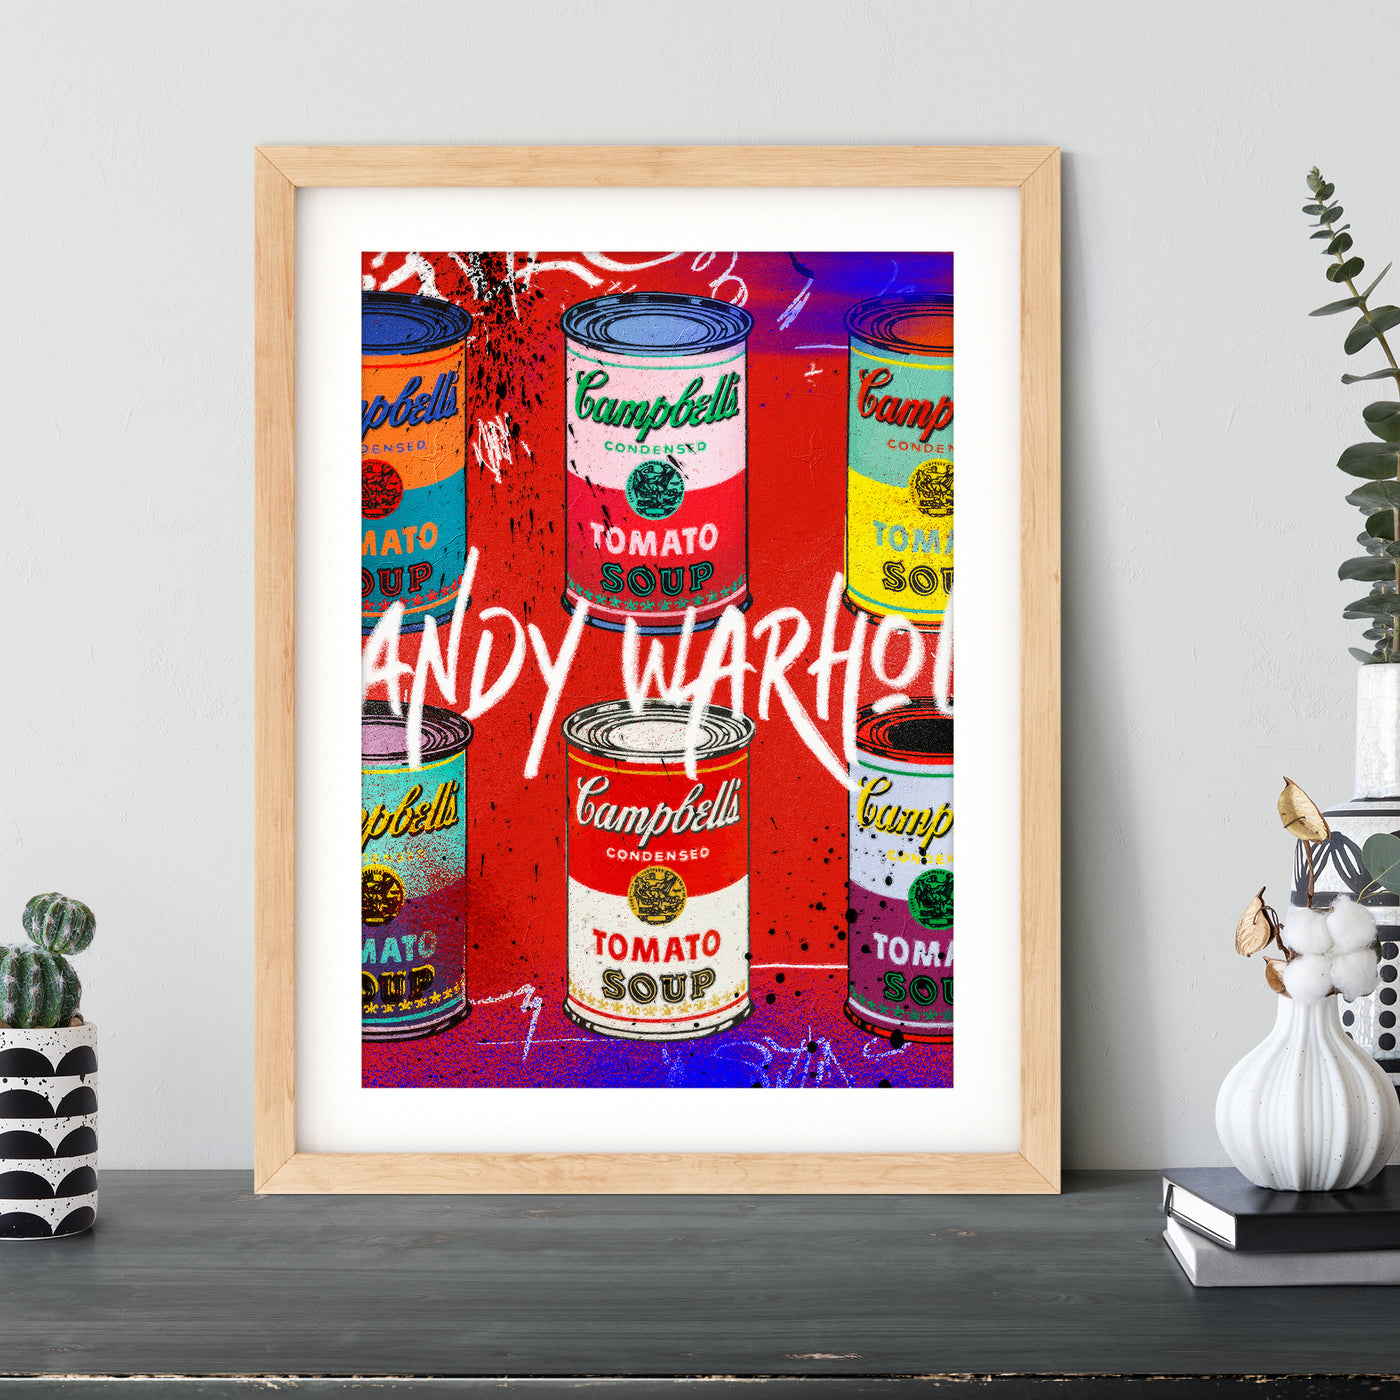 Andy Warhol Soup Cans